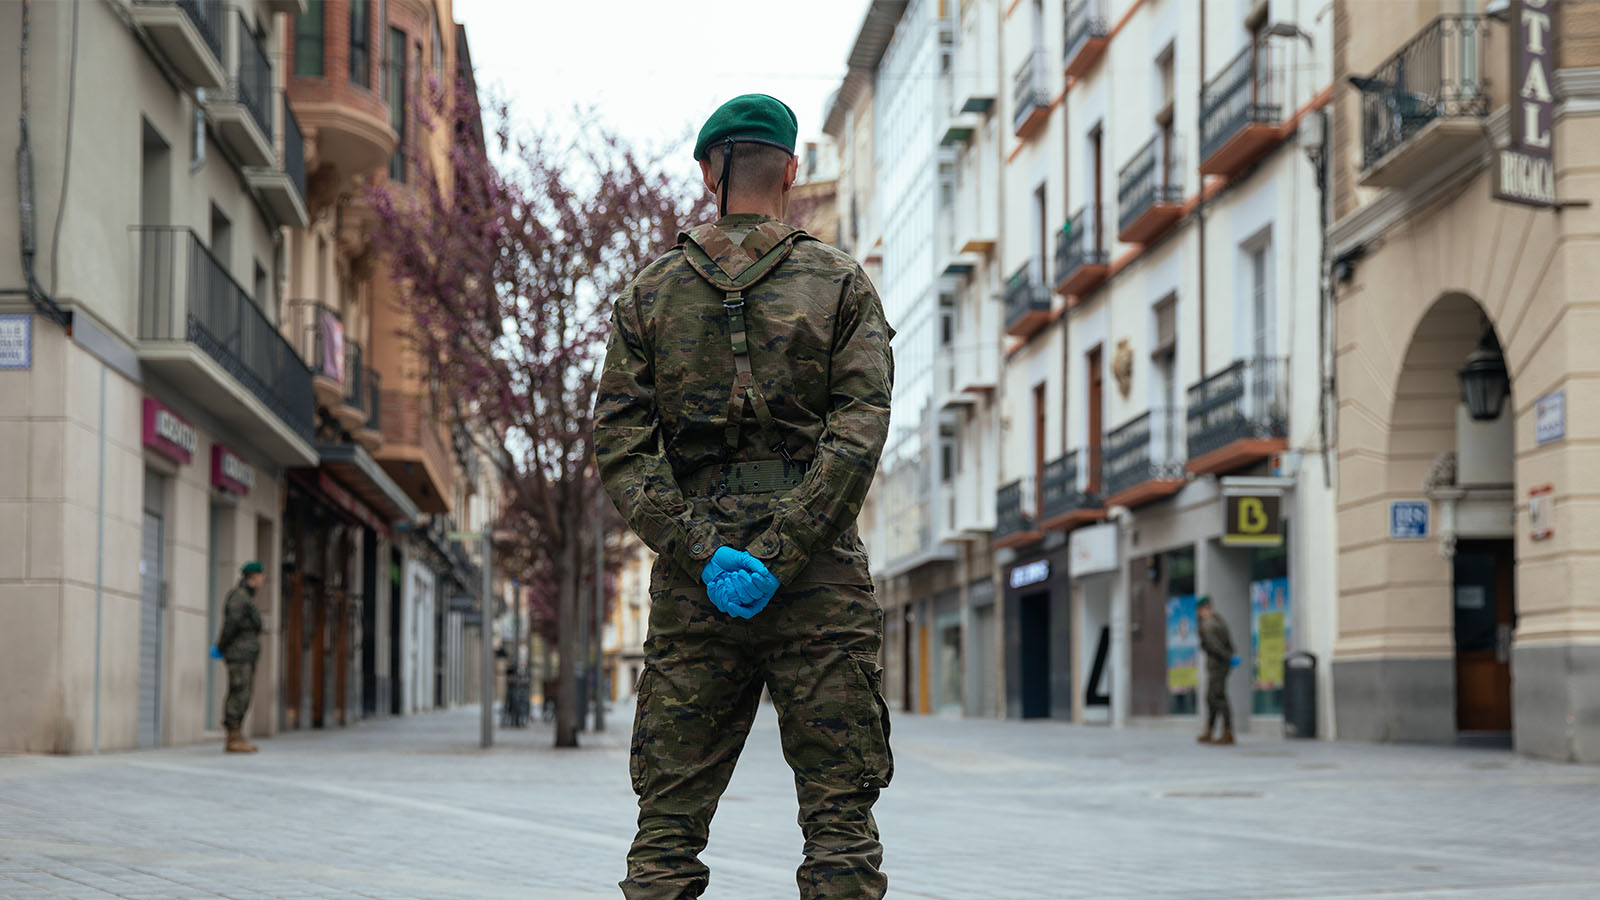 Soldiers patrolling the streets of Spain enforcing the mandatory lockdown put into place to combat the spread of COVID-19, Mar. 2020 (Photograph: Álvaro Calvo / Getty Images)